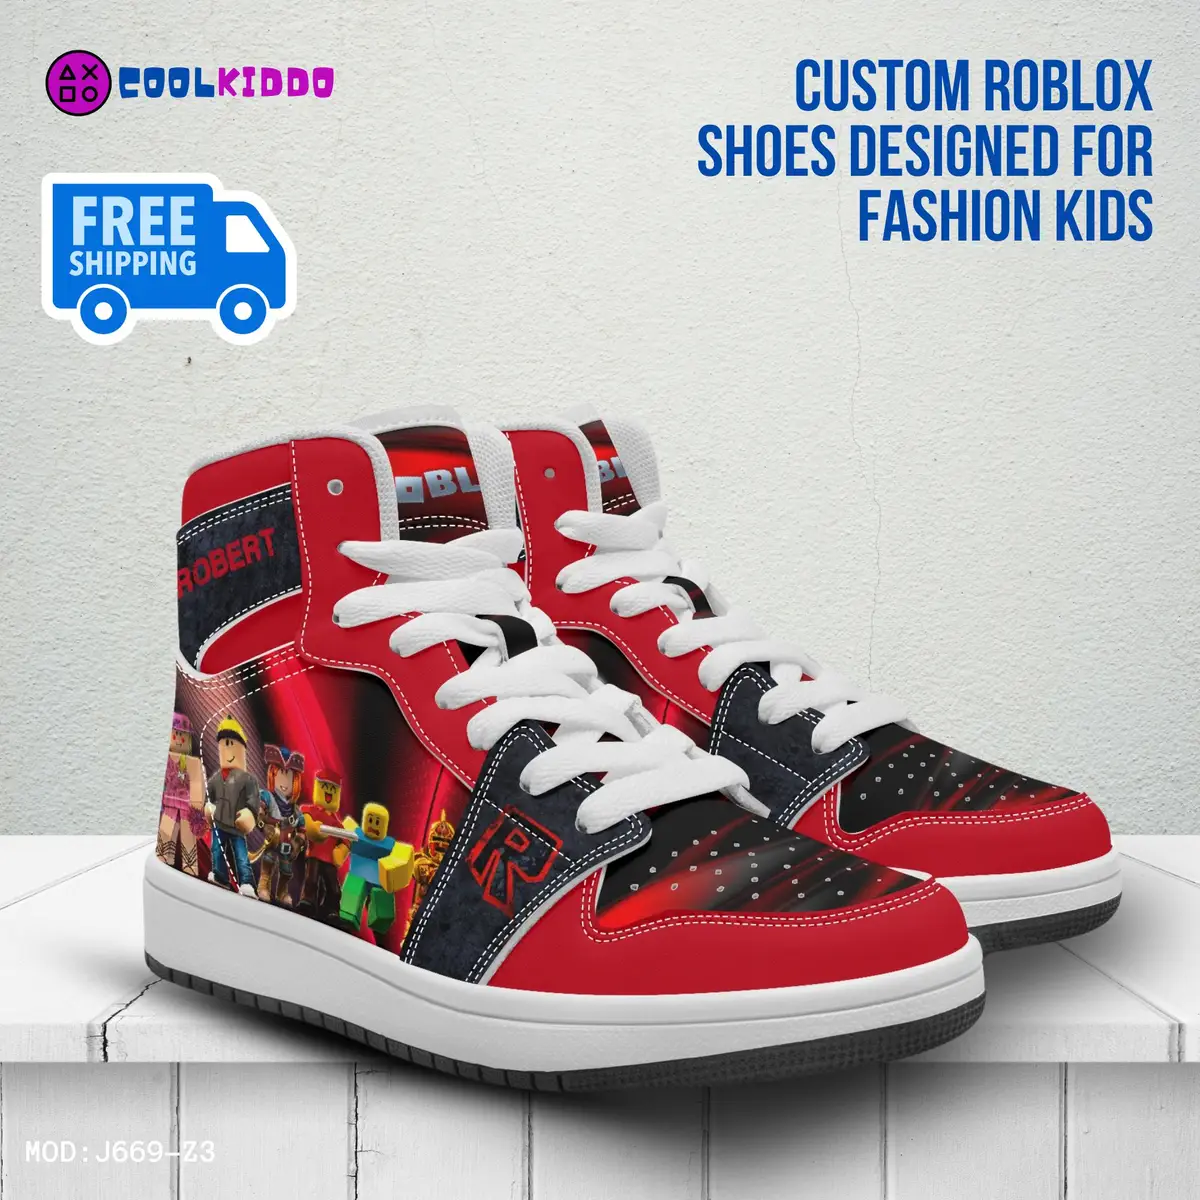 Personalized Name ROBLOX Characters High-Top Leather Black and Red Shoes, Jordans Style Sneakers Cool Kiddo 10